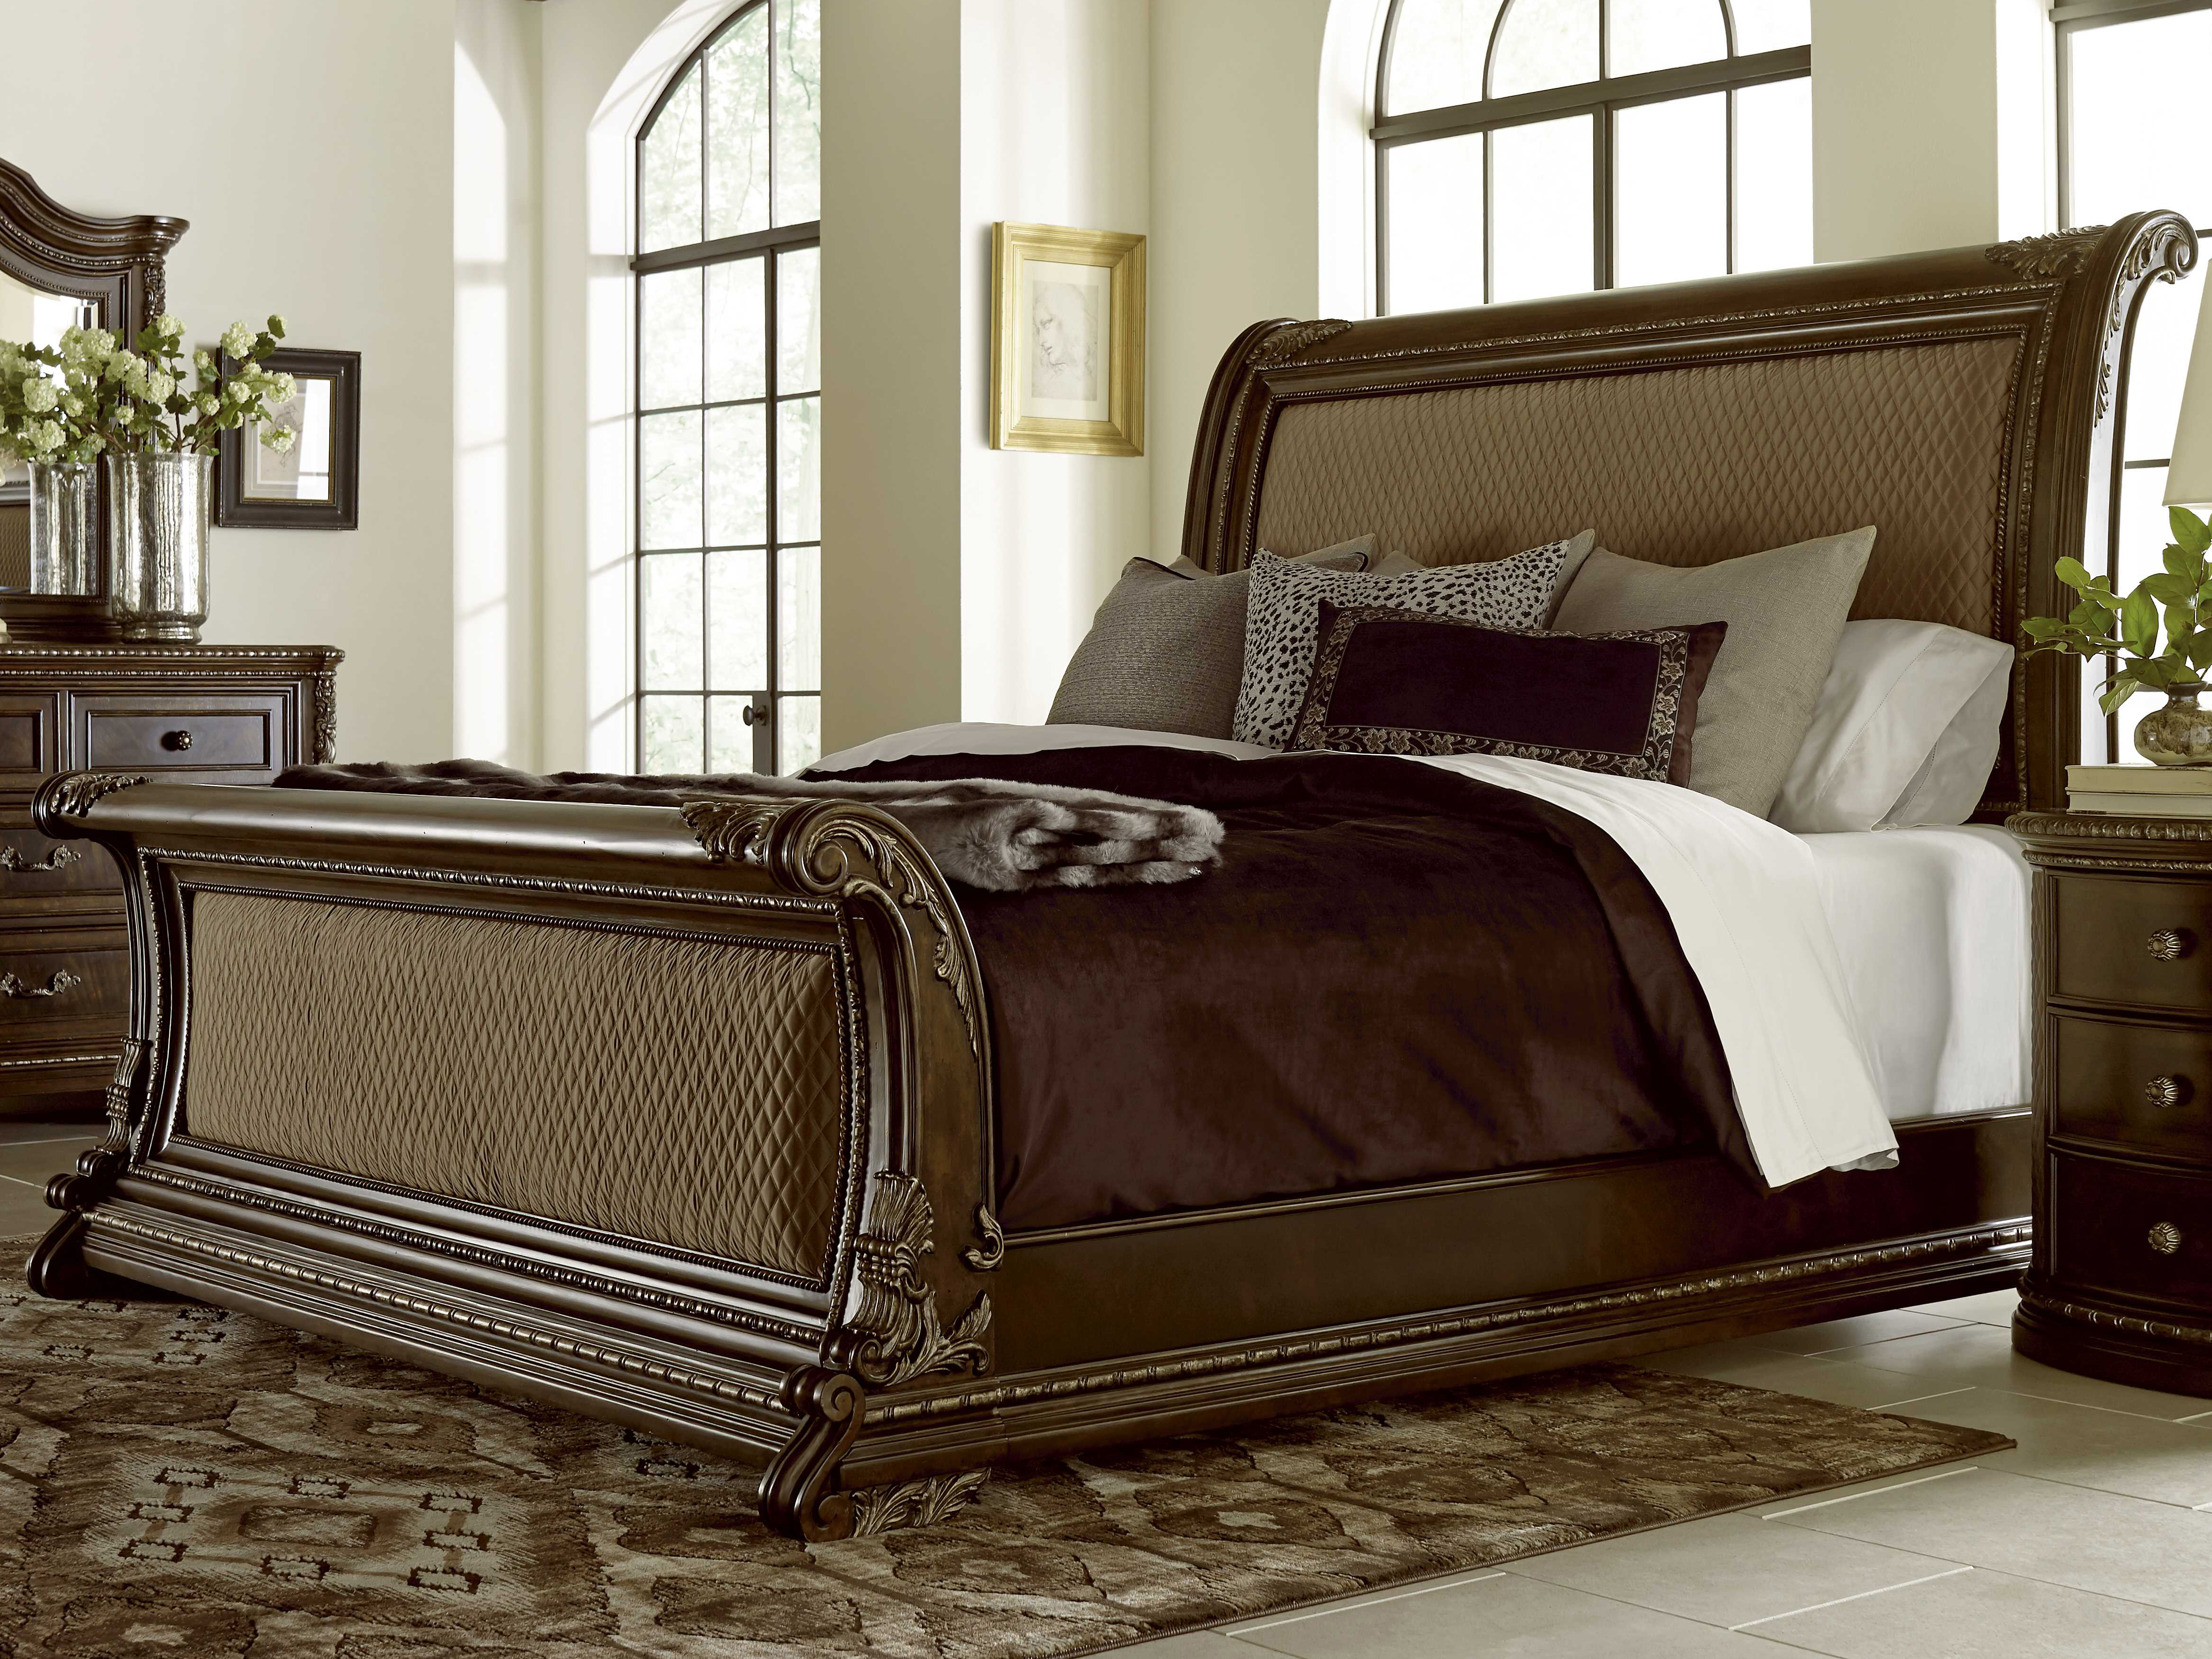 New Sleigh Bed Bedding for Large Space